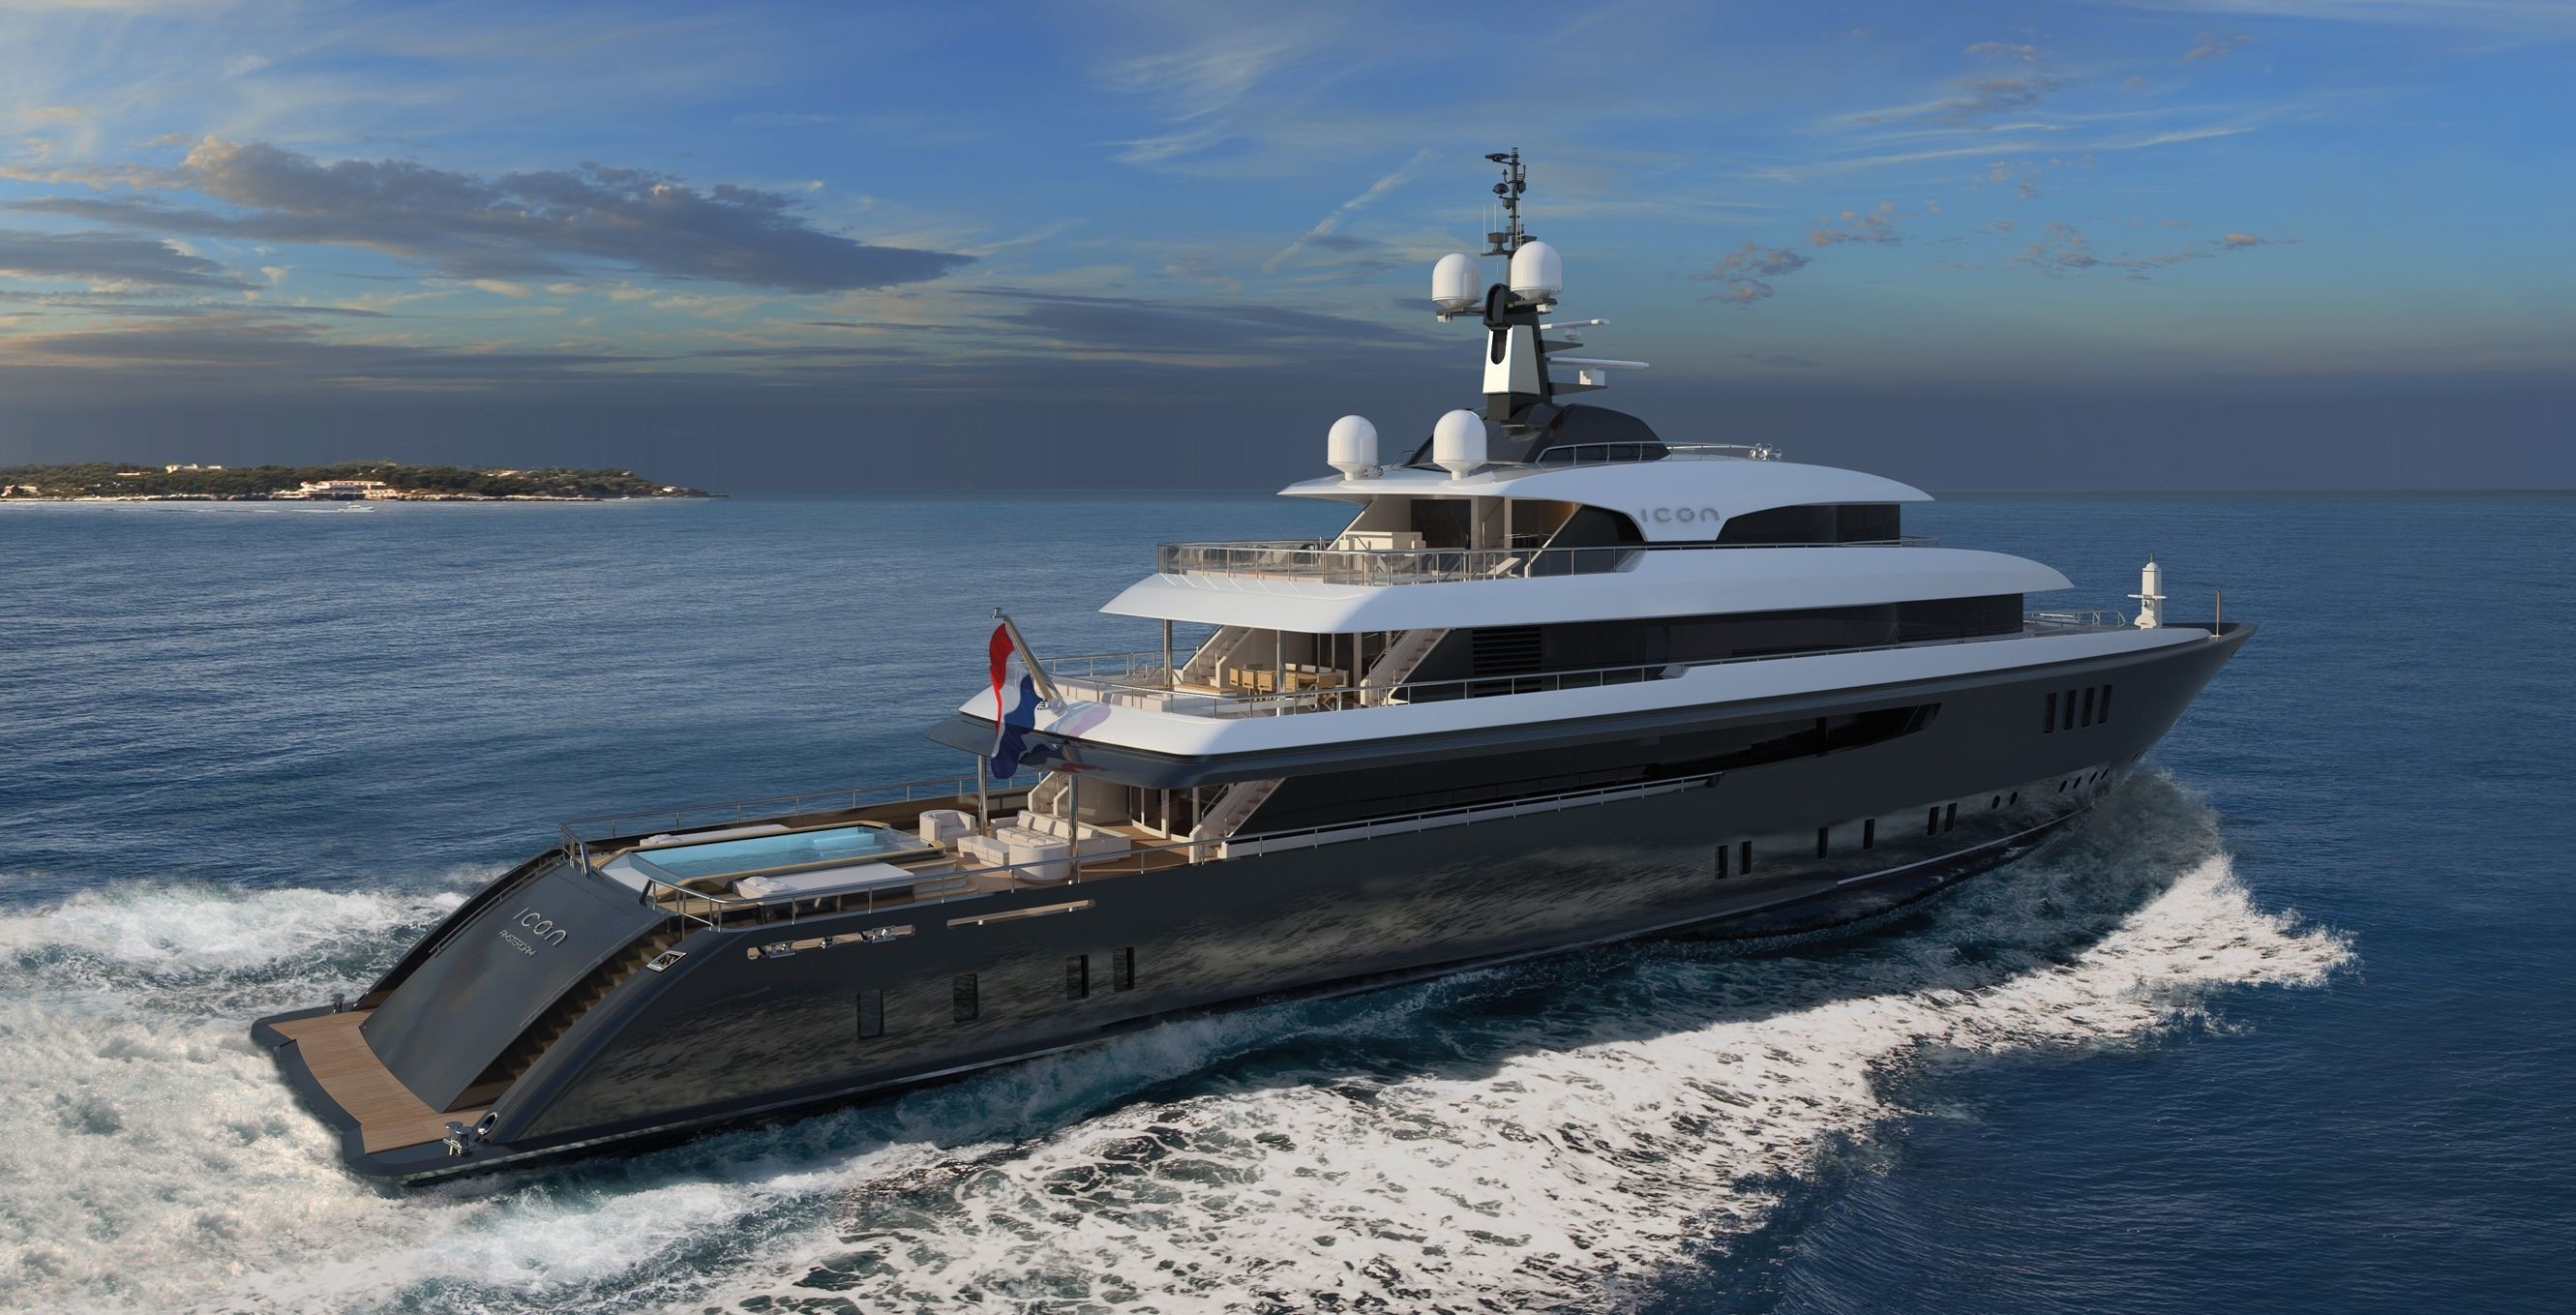 The 68m Yacht ICON